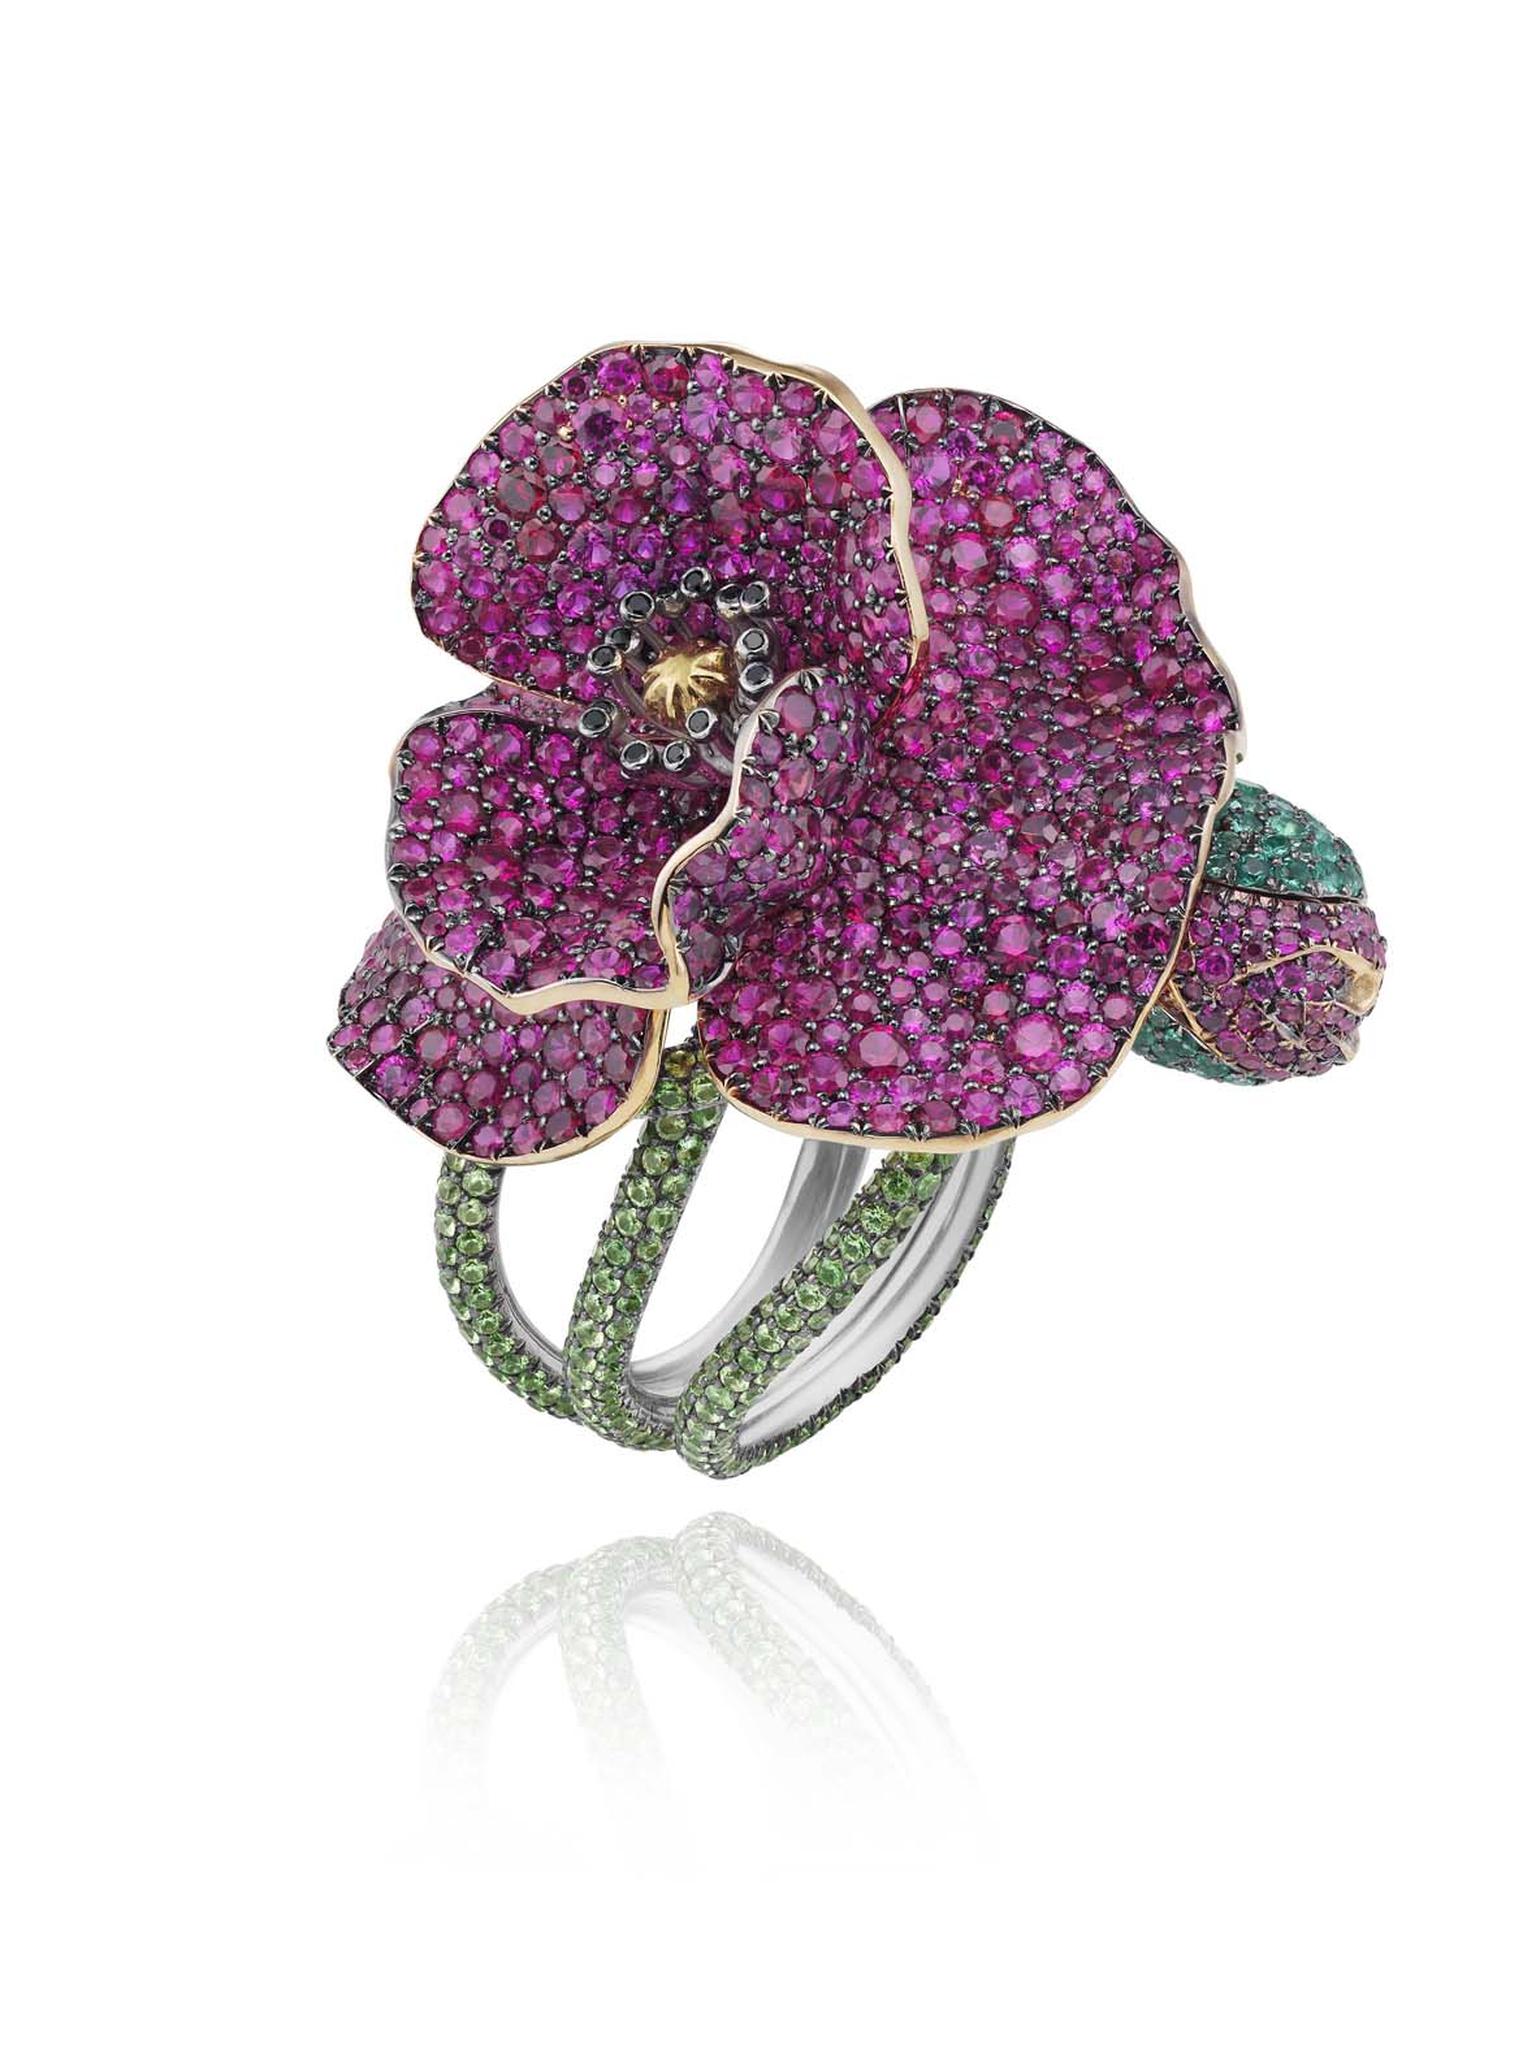 829236-9001 Poppy Ring  from the Red Carpet Collection 2013 whiteChopardChopard.jpg